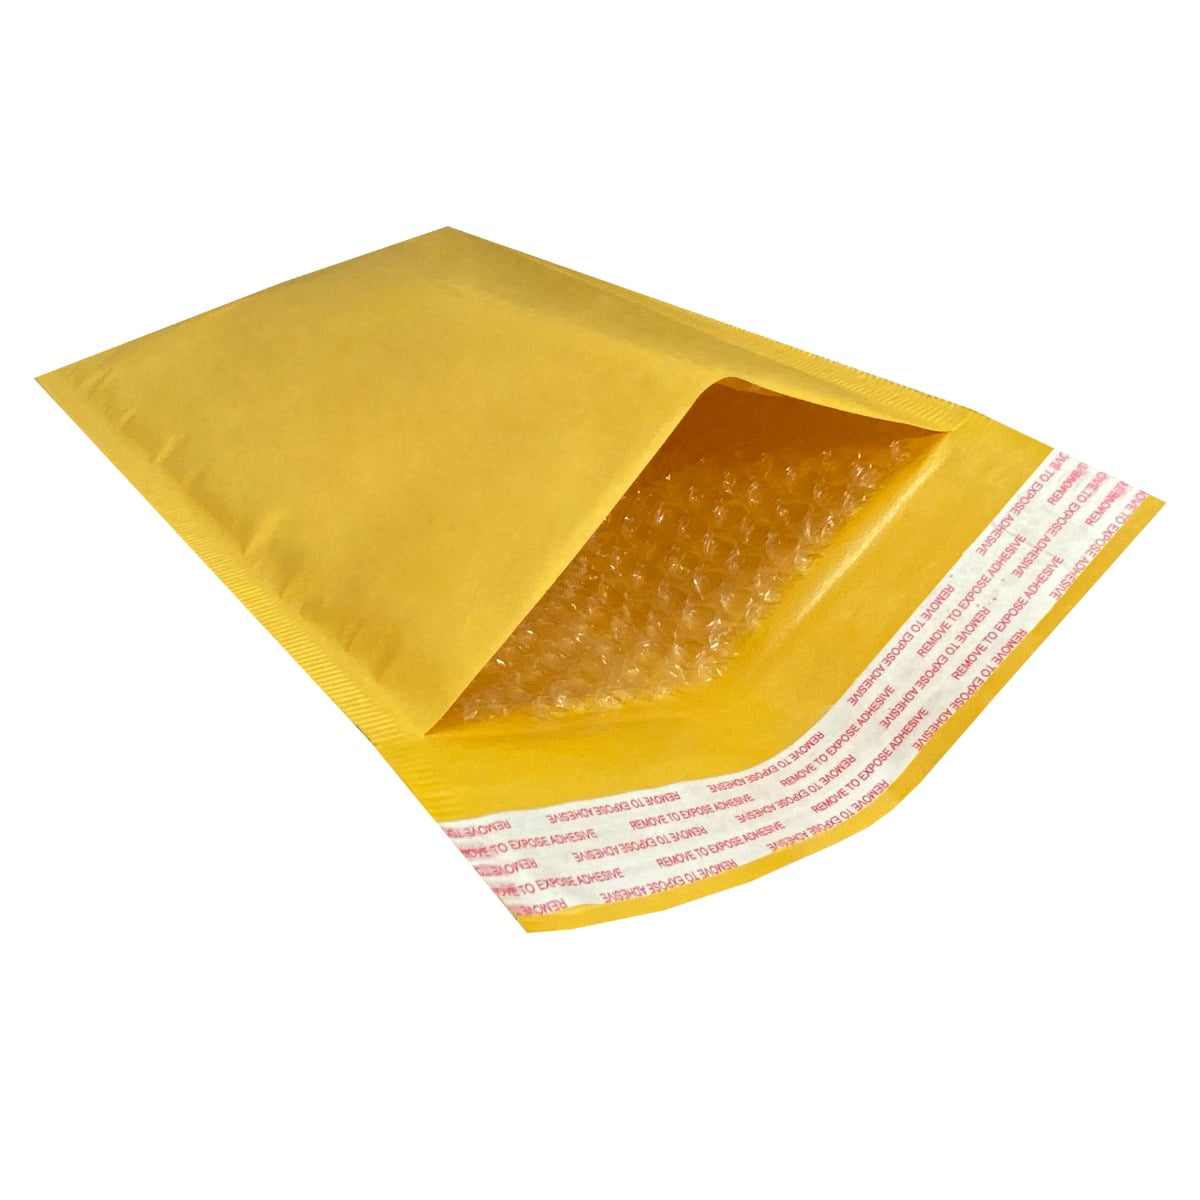 50 #1 TUFF Poly Bubble Mailers 7.25x12 Self Seal Padded Envelopes 7.25 x 12 